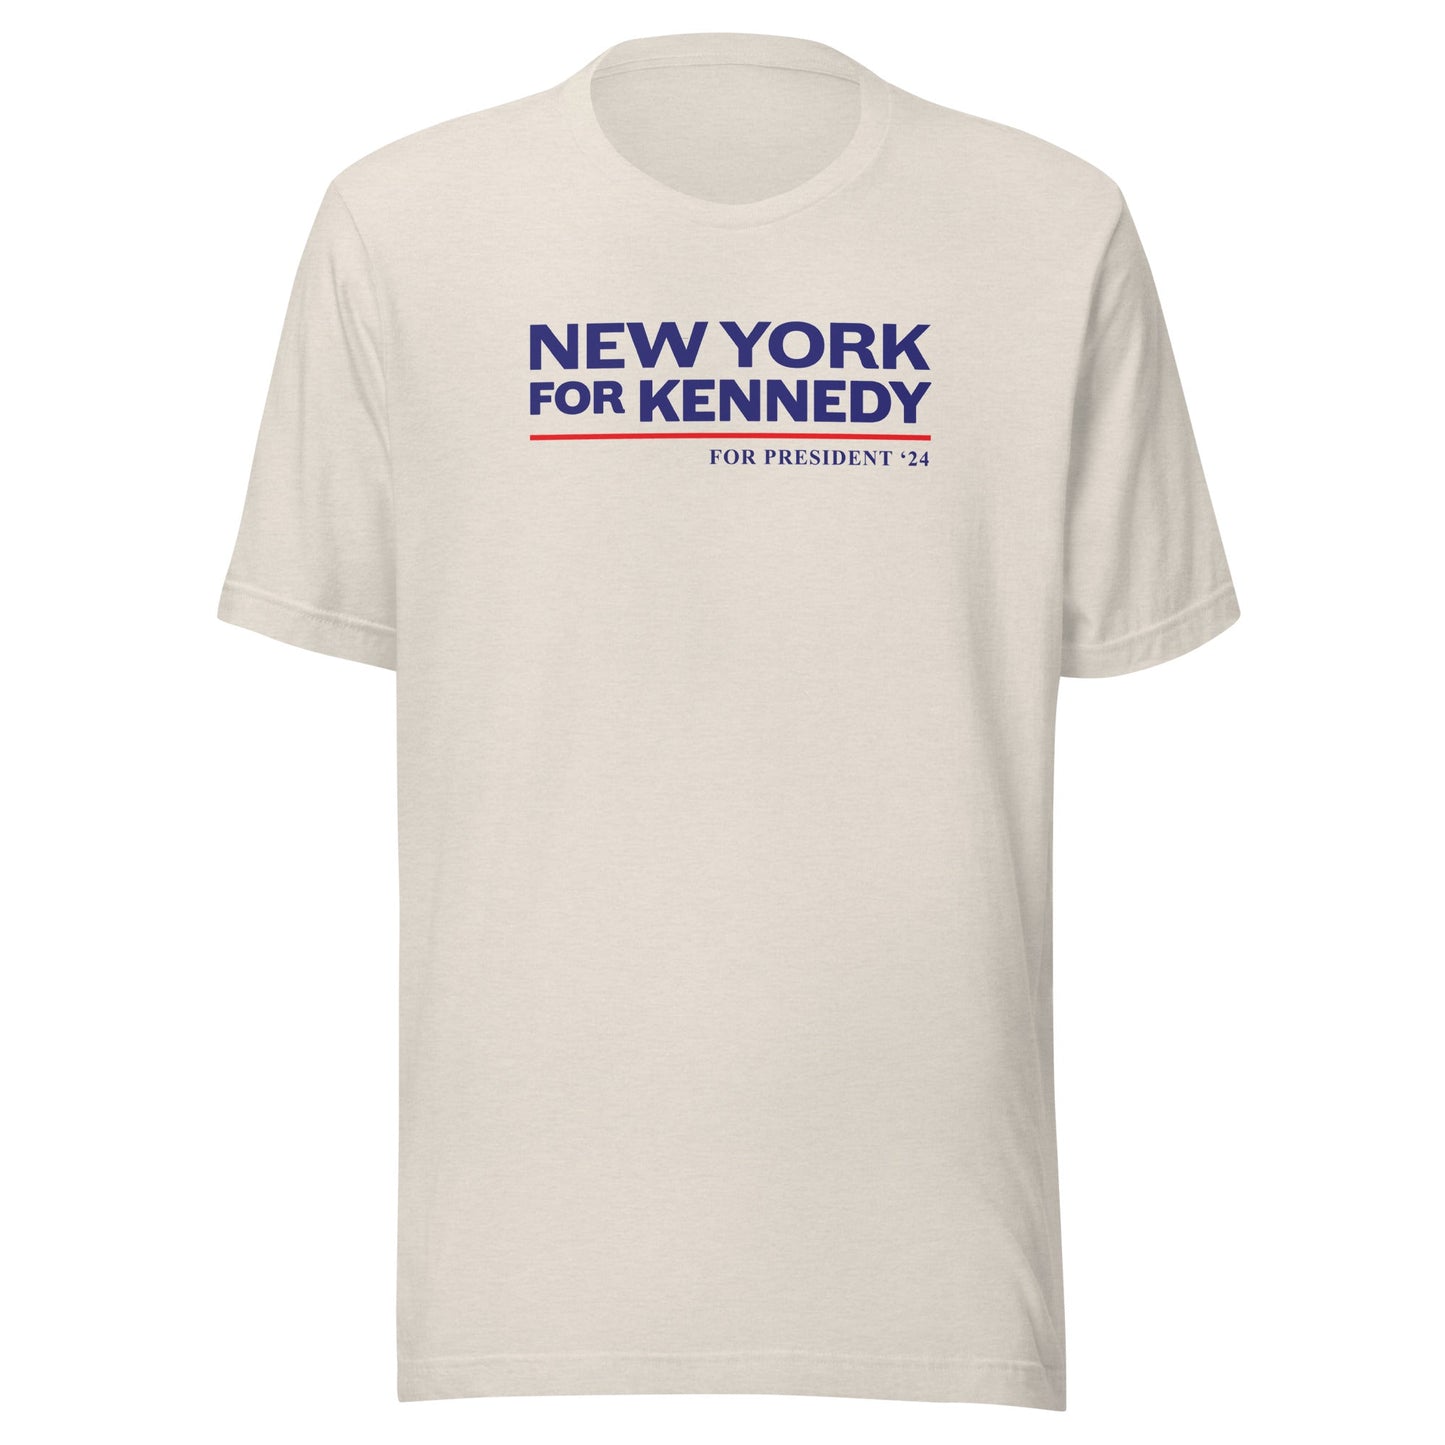 New York for Kennedy Unisex Tee - TEAM KENNEDY. All rights reserved